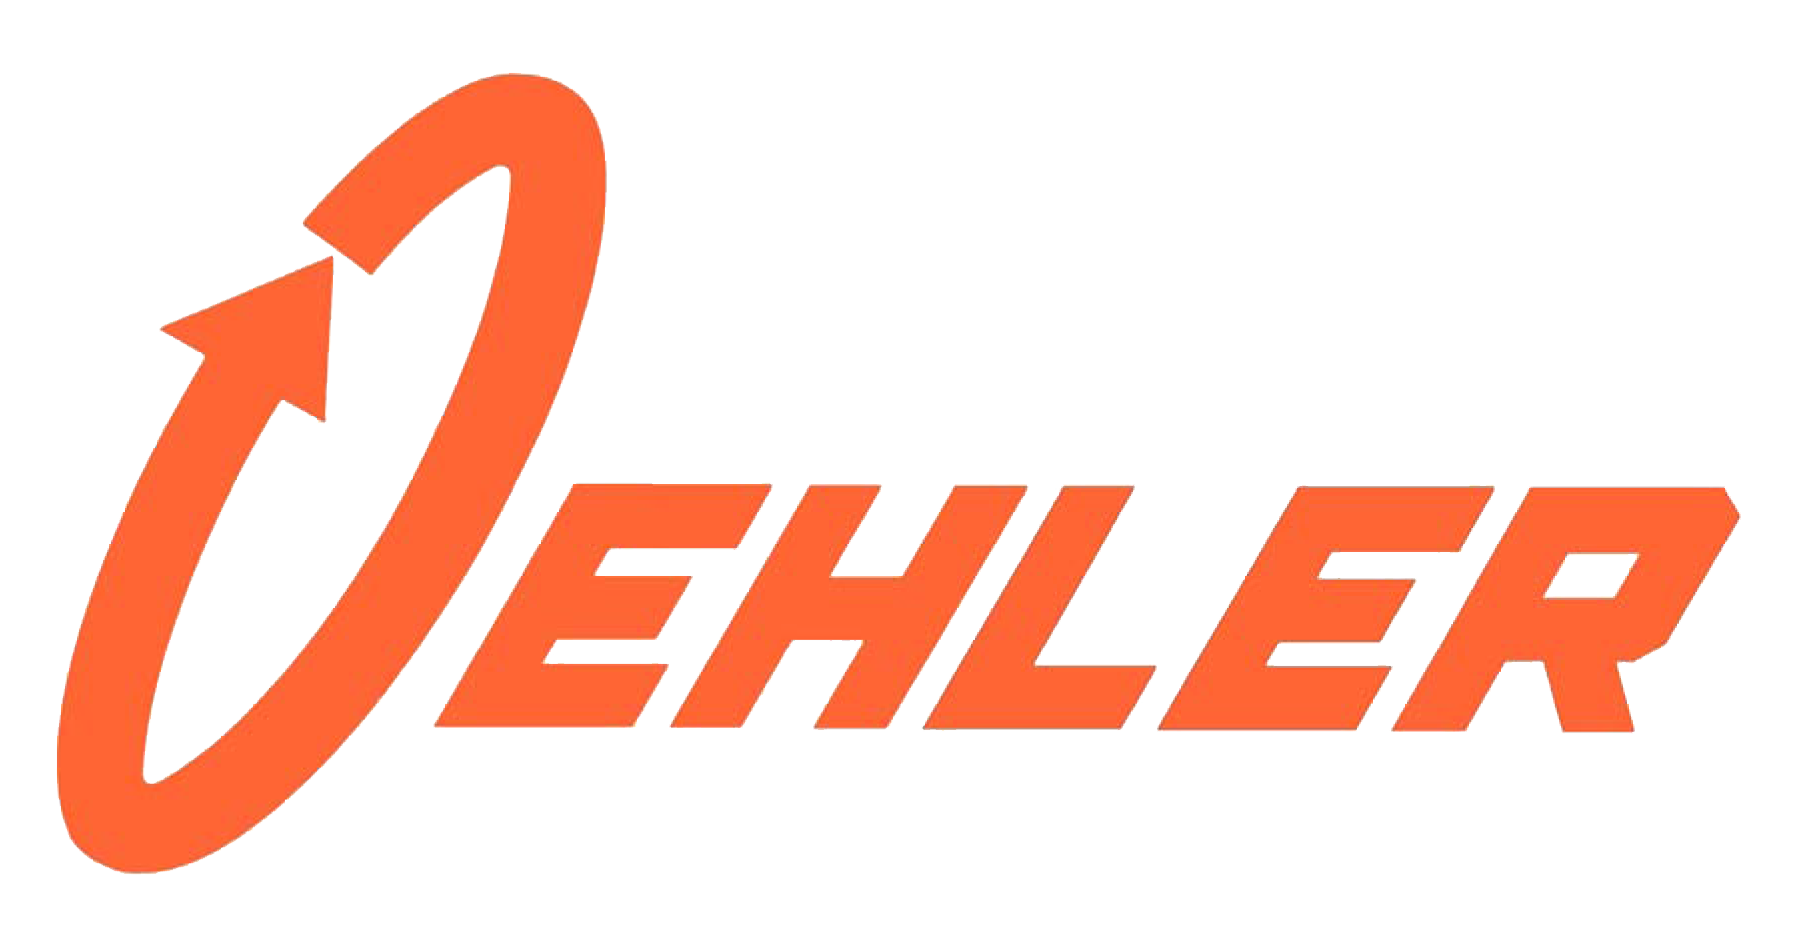 oehler-research.com